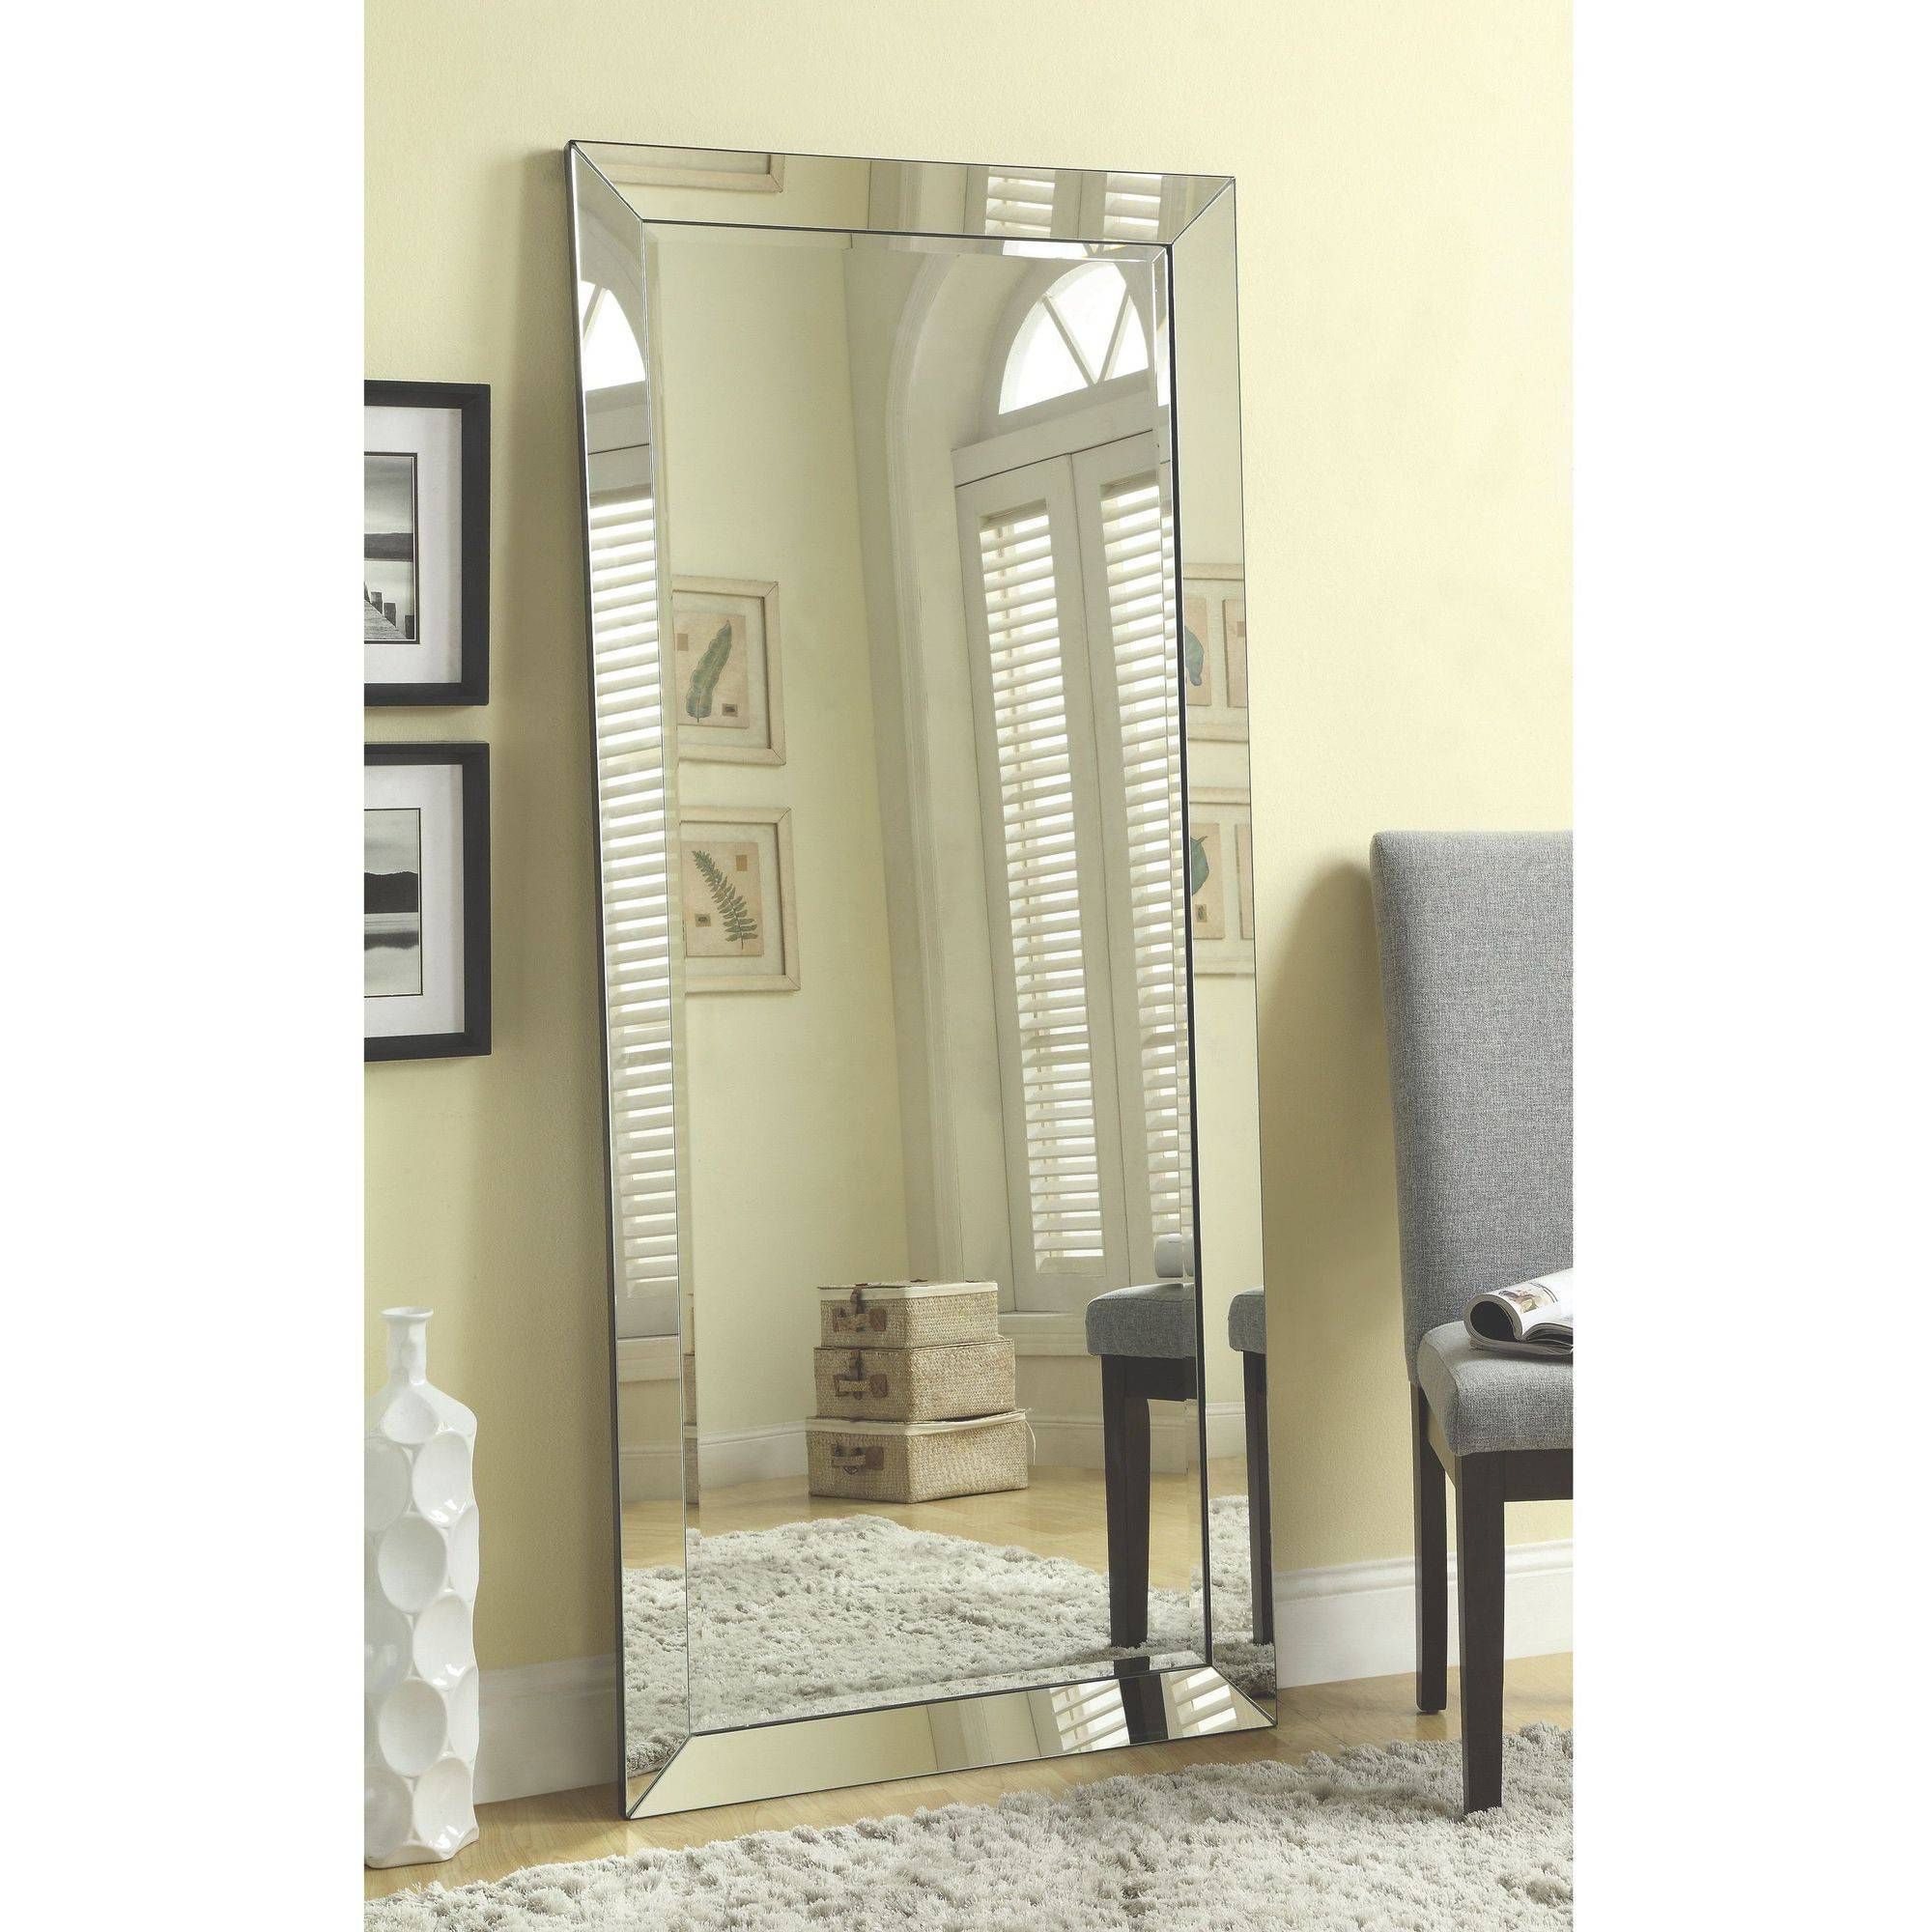 20 Best Large Beveled Wall Mirrors 